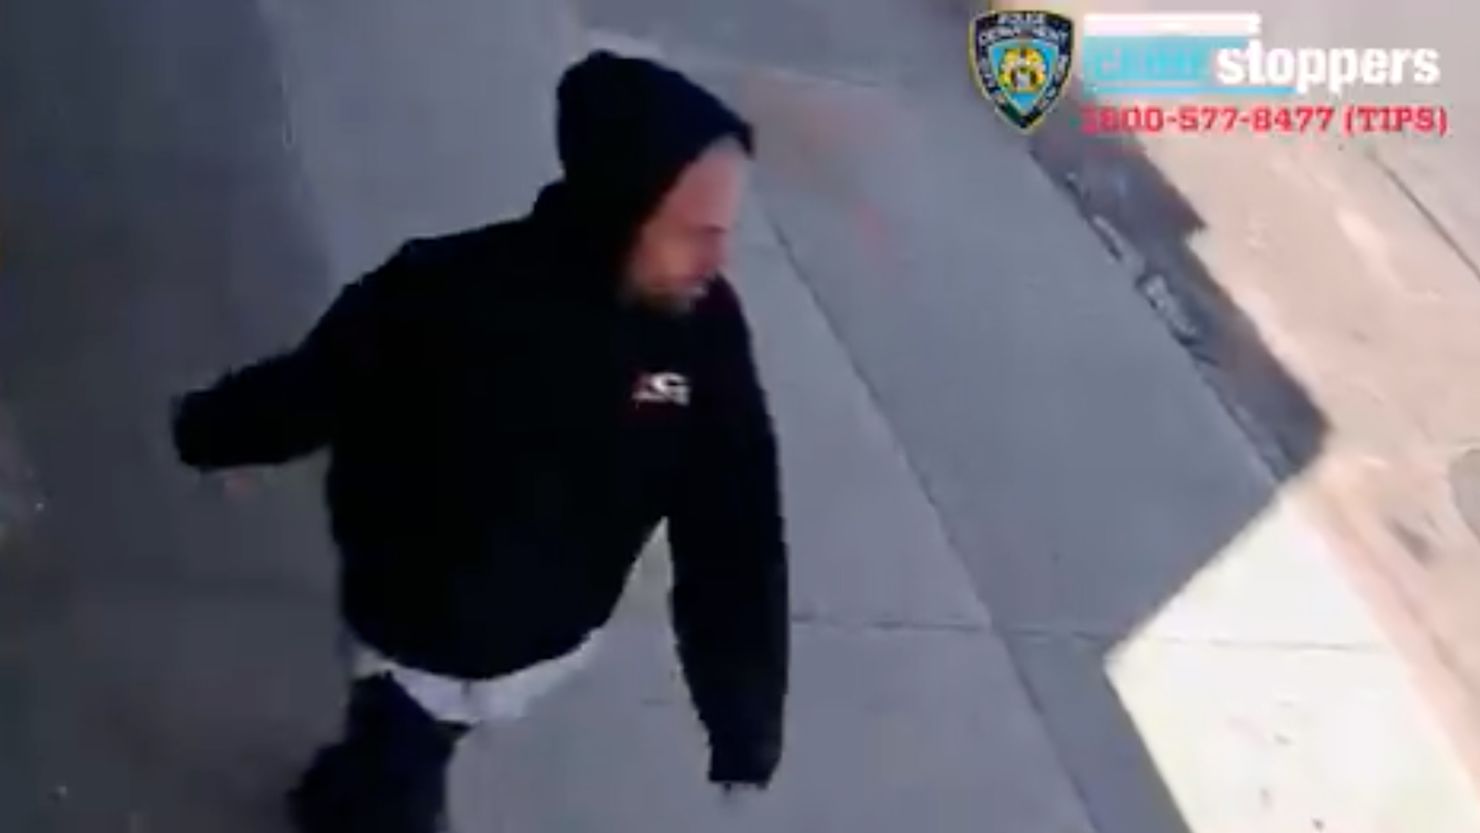 Surveillance video captured Joseph Russo attacking three Asian Americans in three separate attacks, according to the Brooklyn District Attorney's office.